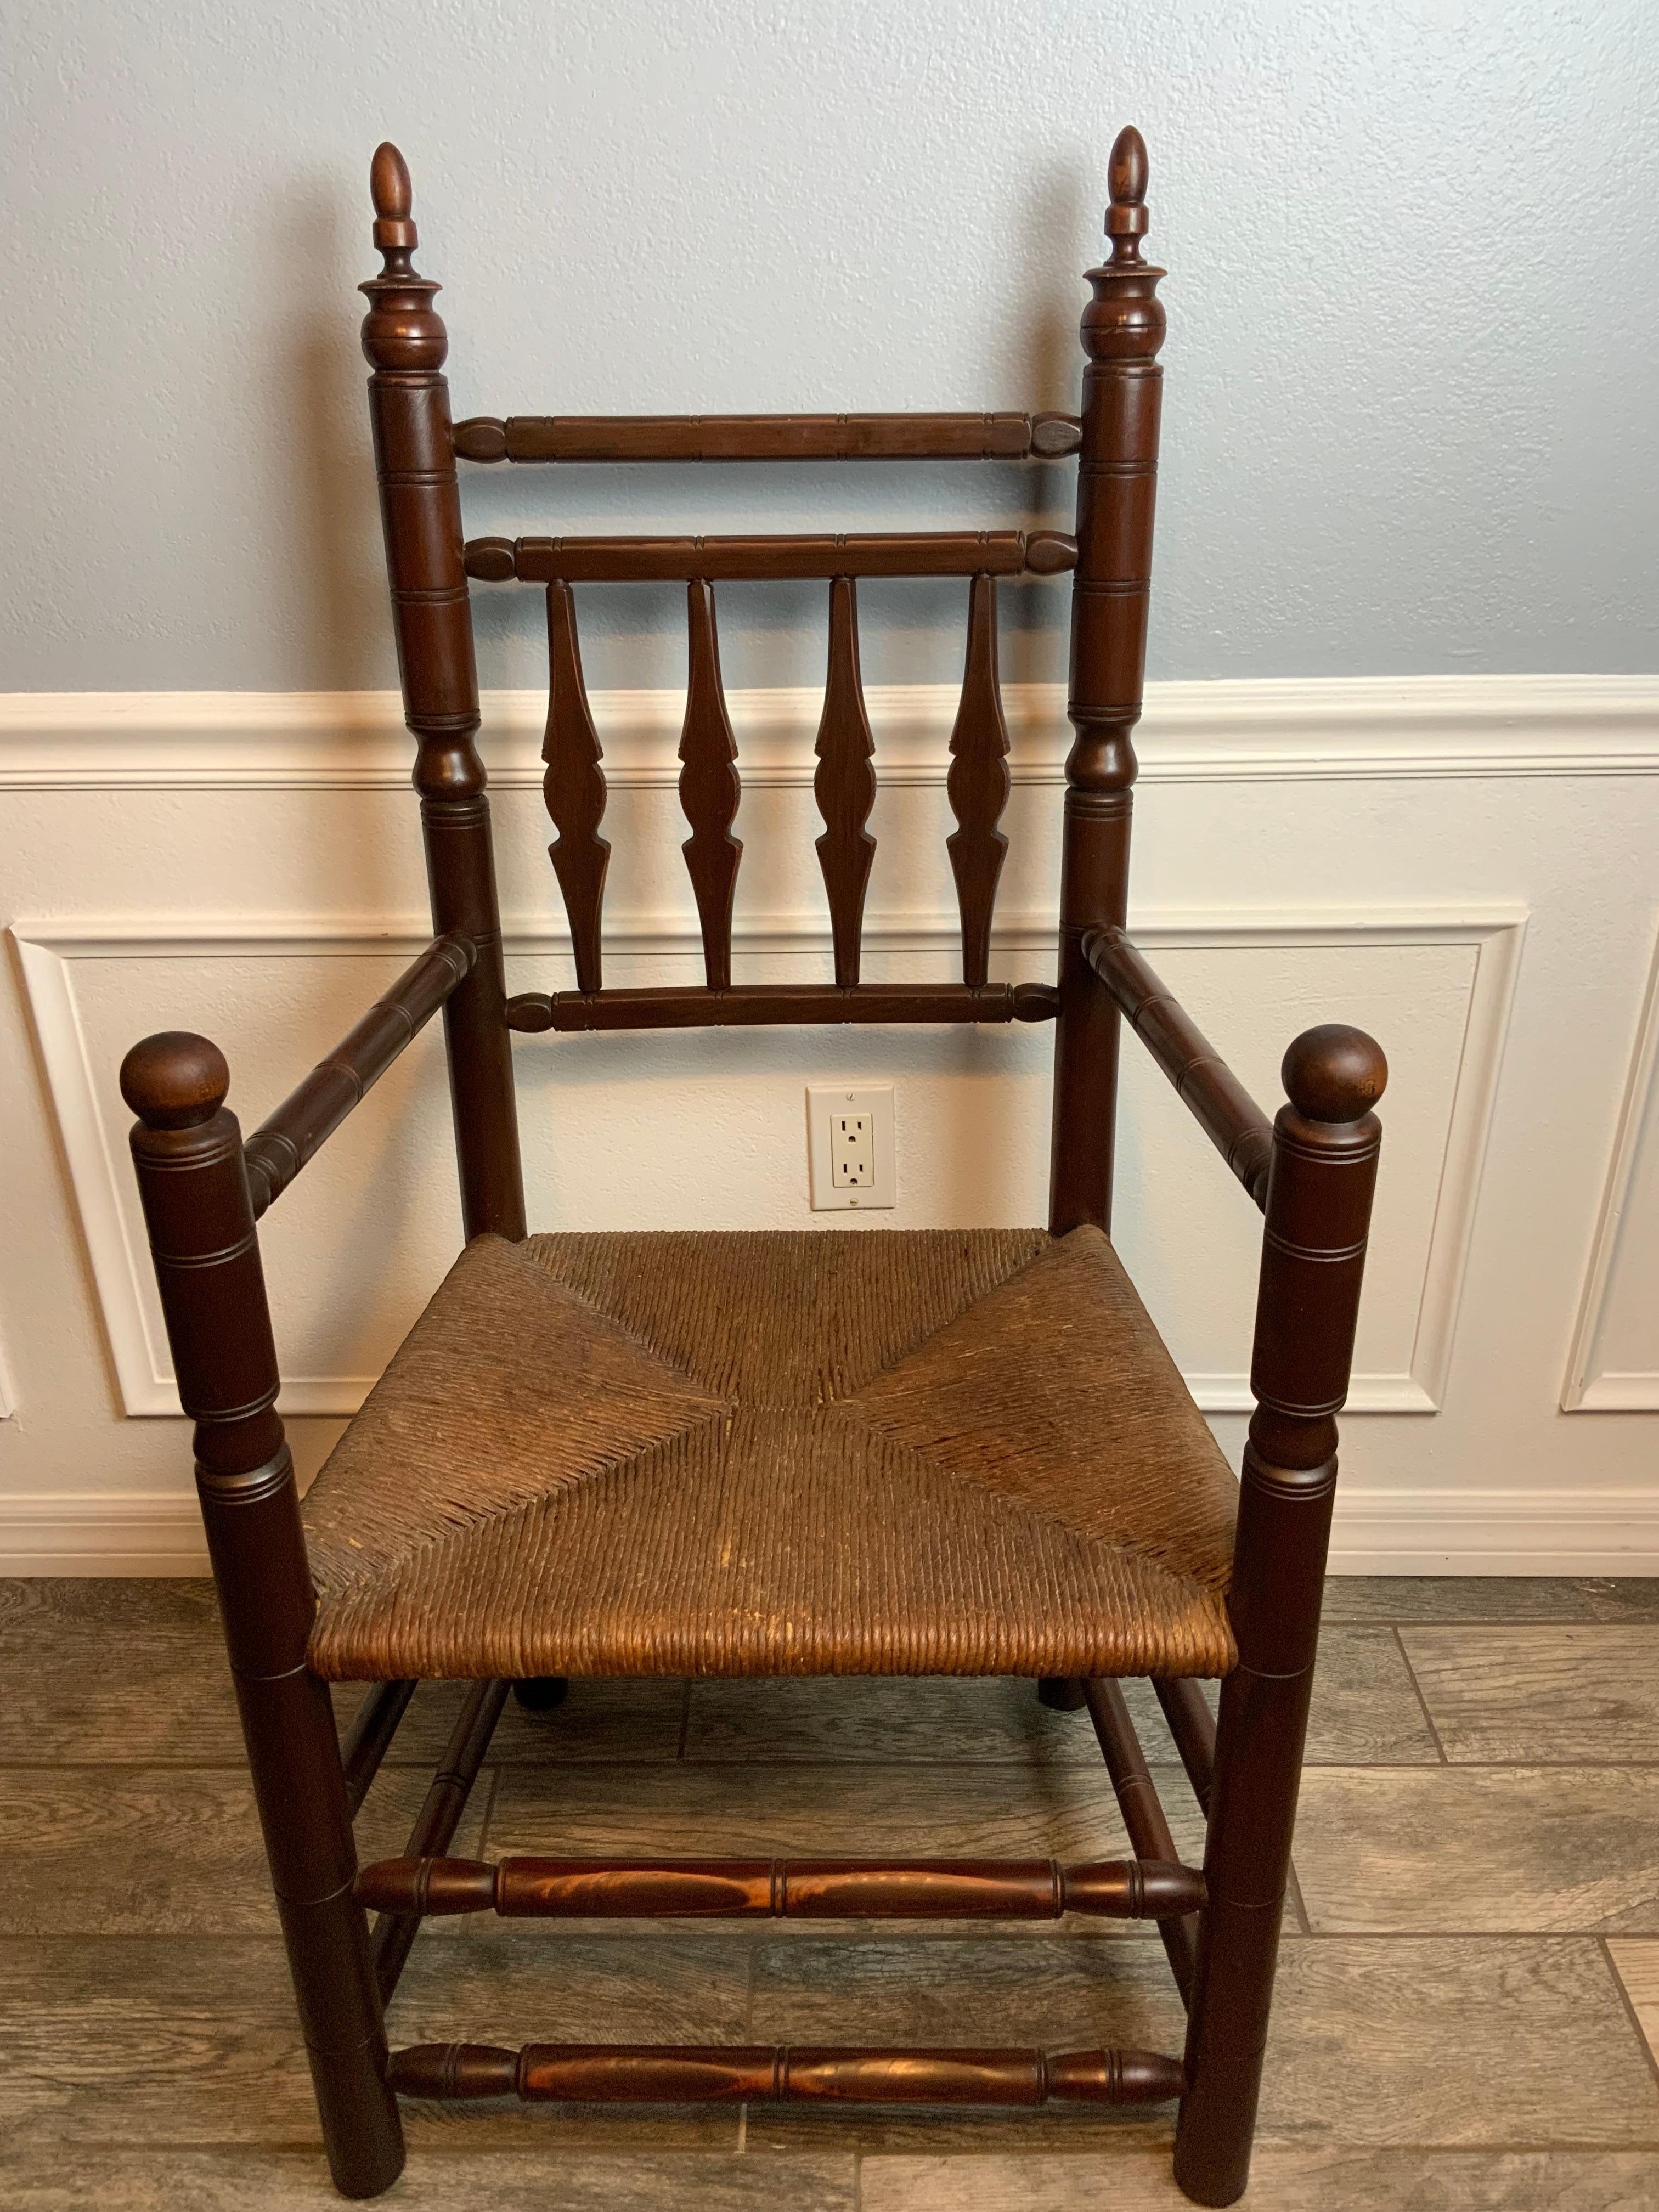 A very classic form of a 17th century New England Style Carver chair that looks to be made in the late 1800’s or early 1900’s.  This very well crafted chair is made of Maple and ash and has an old rush seat that is in very good condition considering